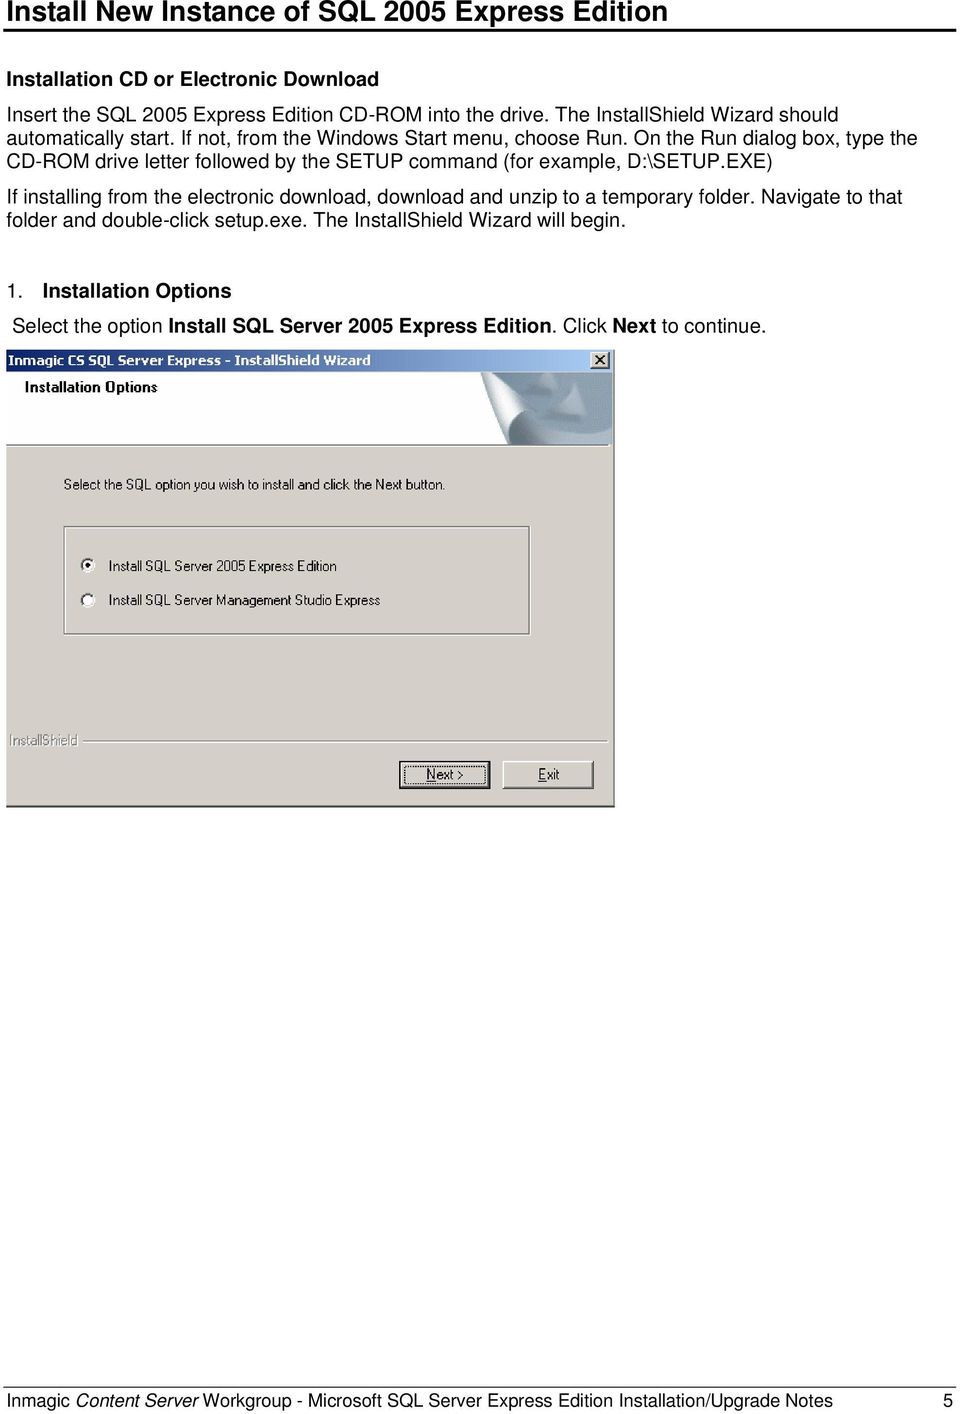 On the Run dialog box, type the CD-ROM drive letter followed by the SETUP command (for example, D:\SETUP.